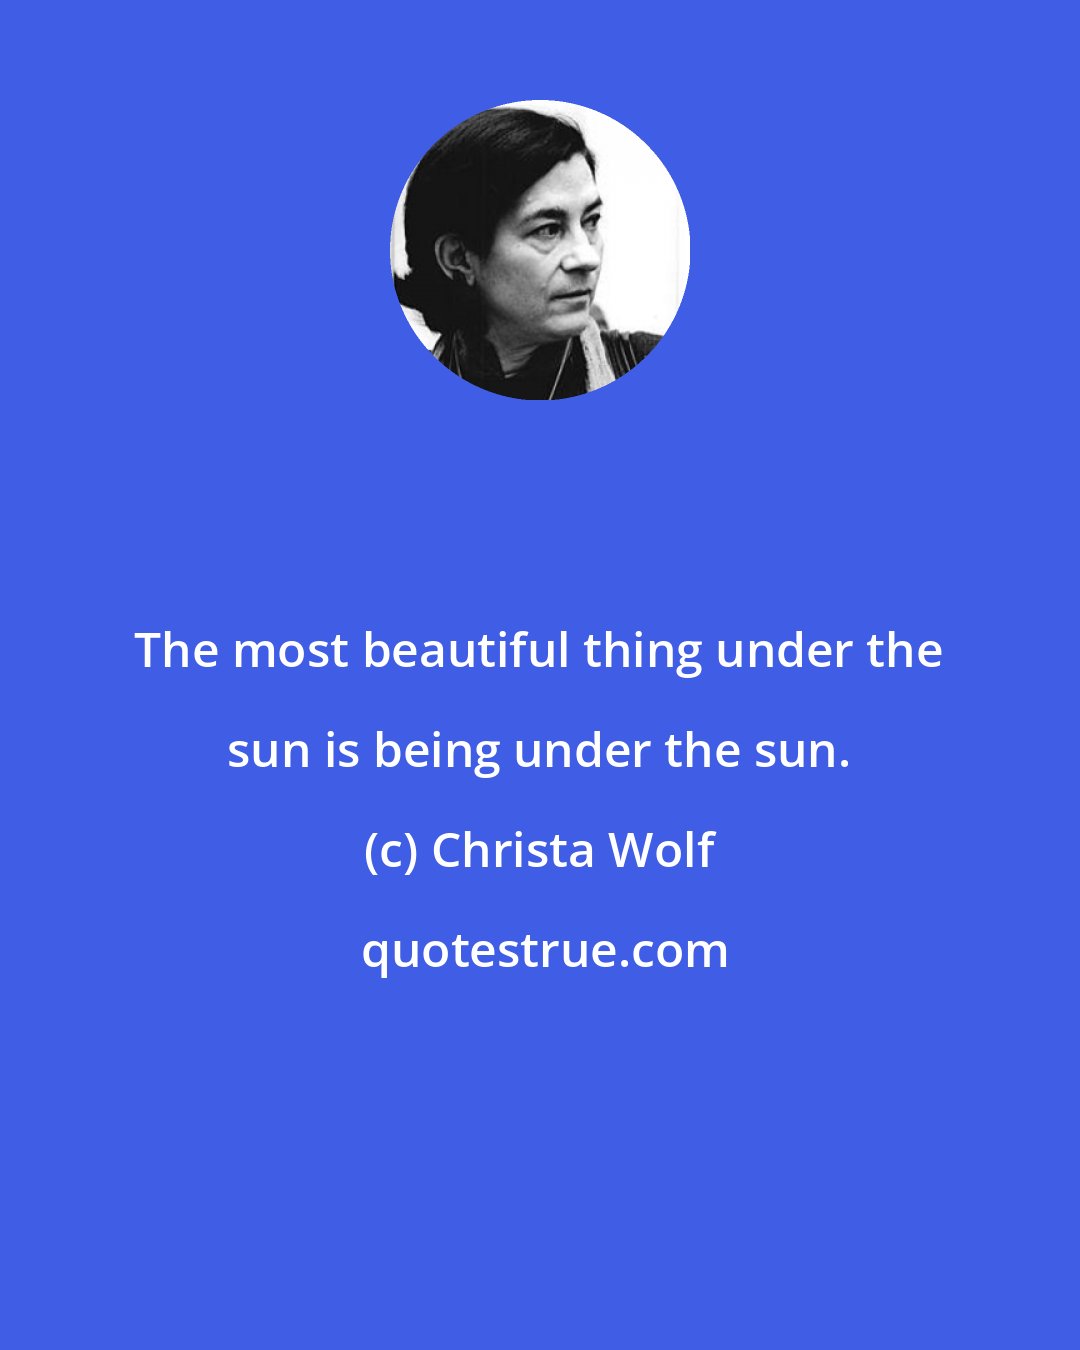 Christa Wolf: The most beautiful thing under the sun is being under the sun.